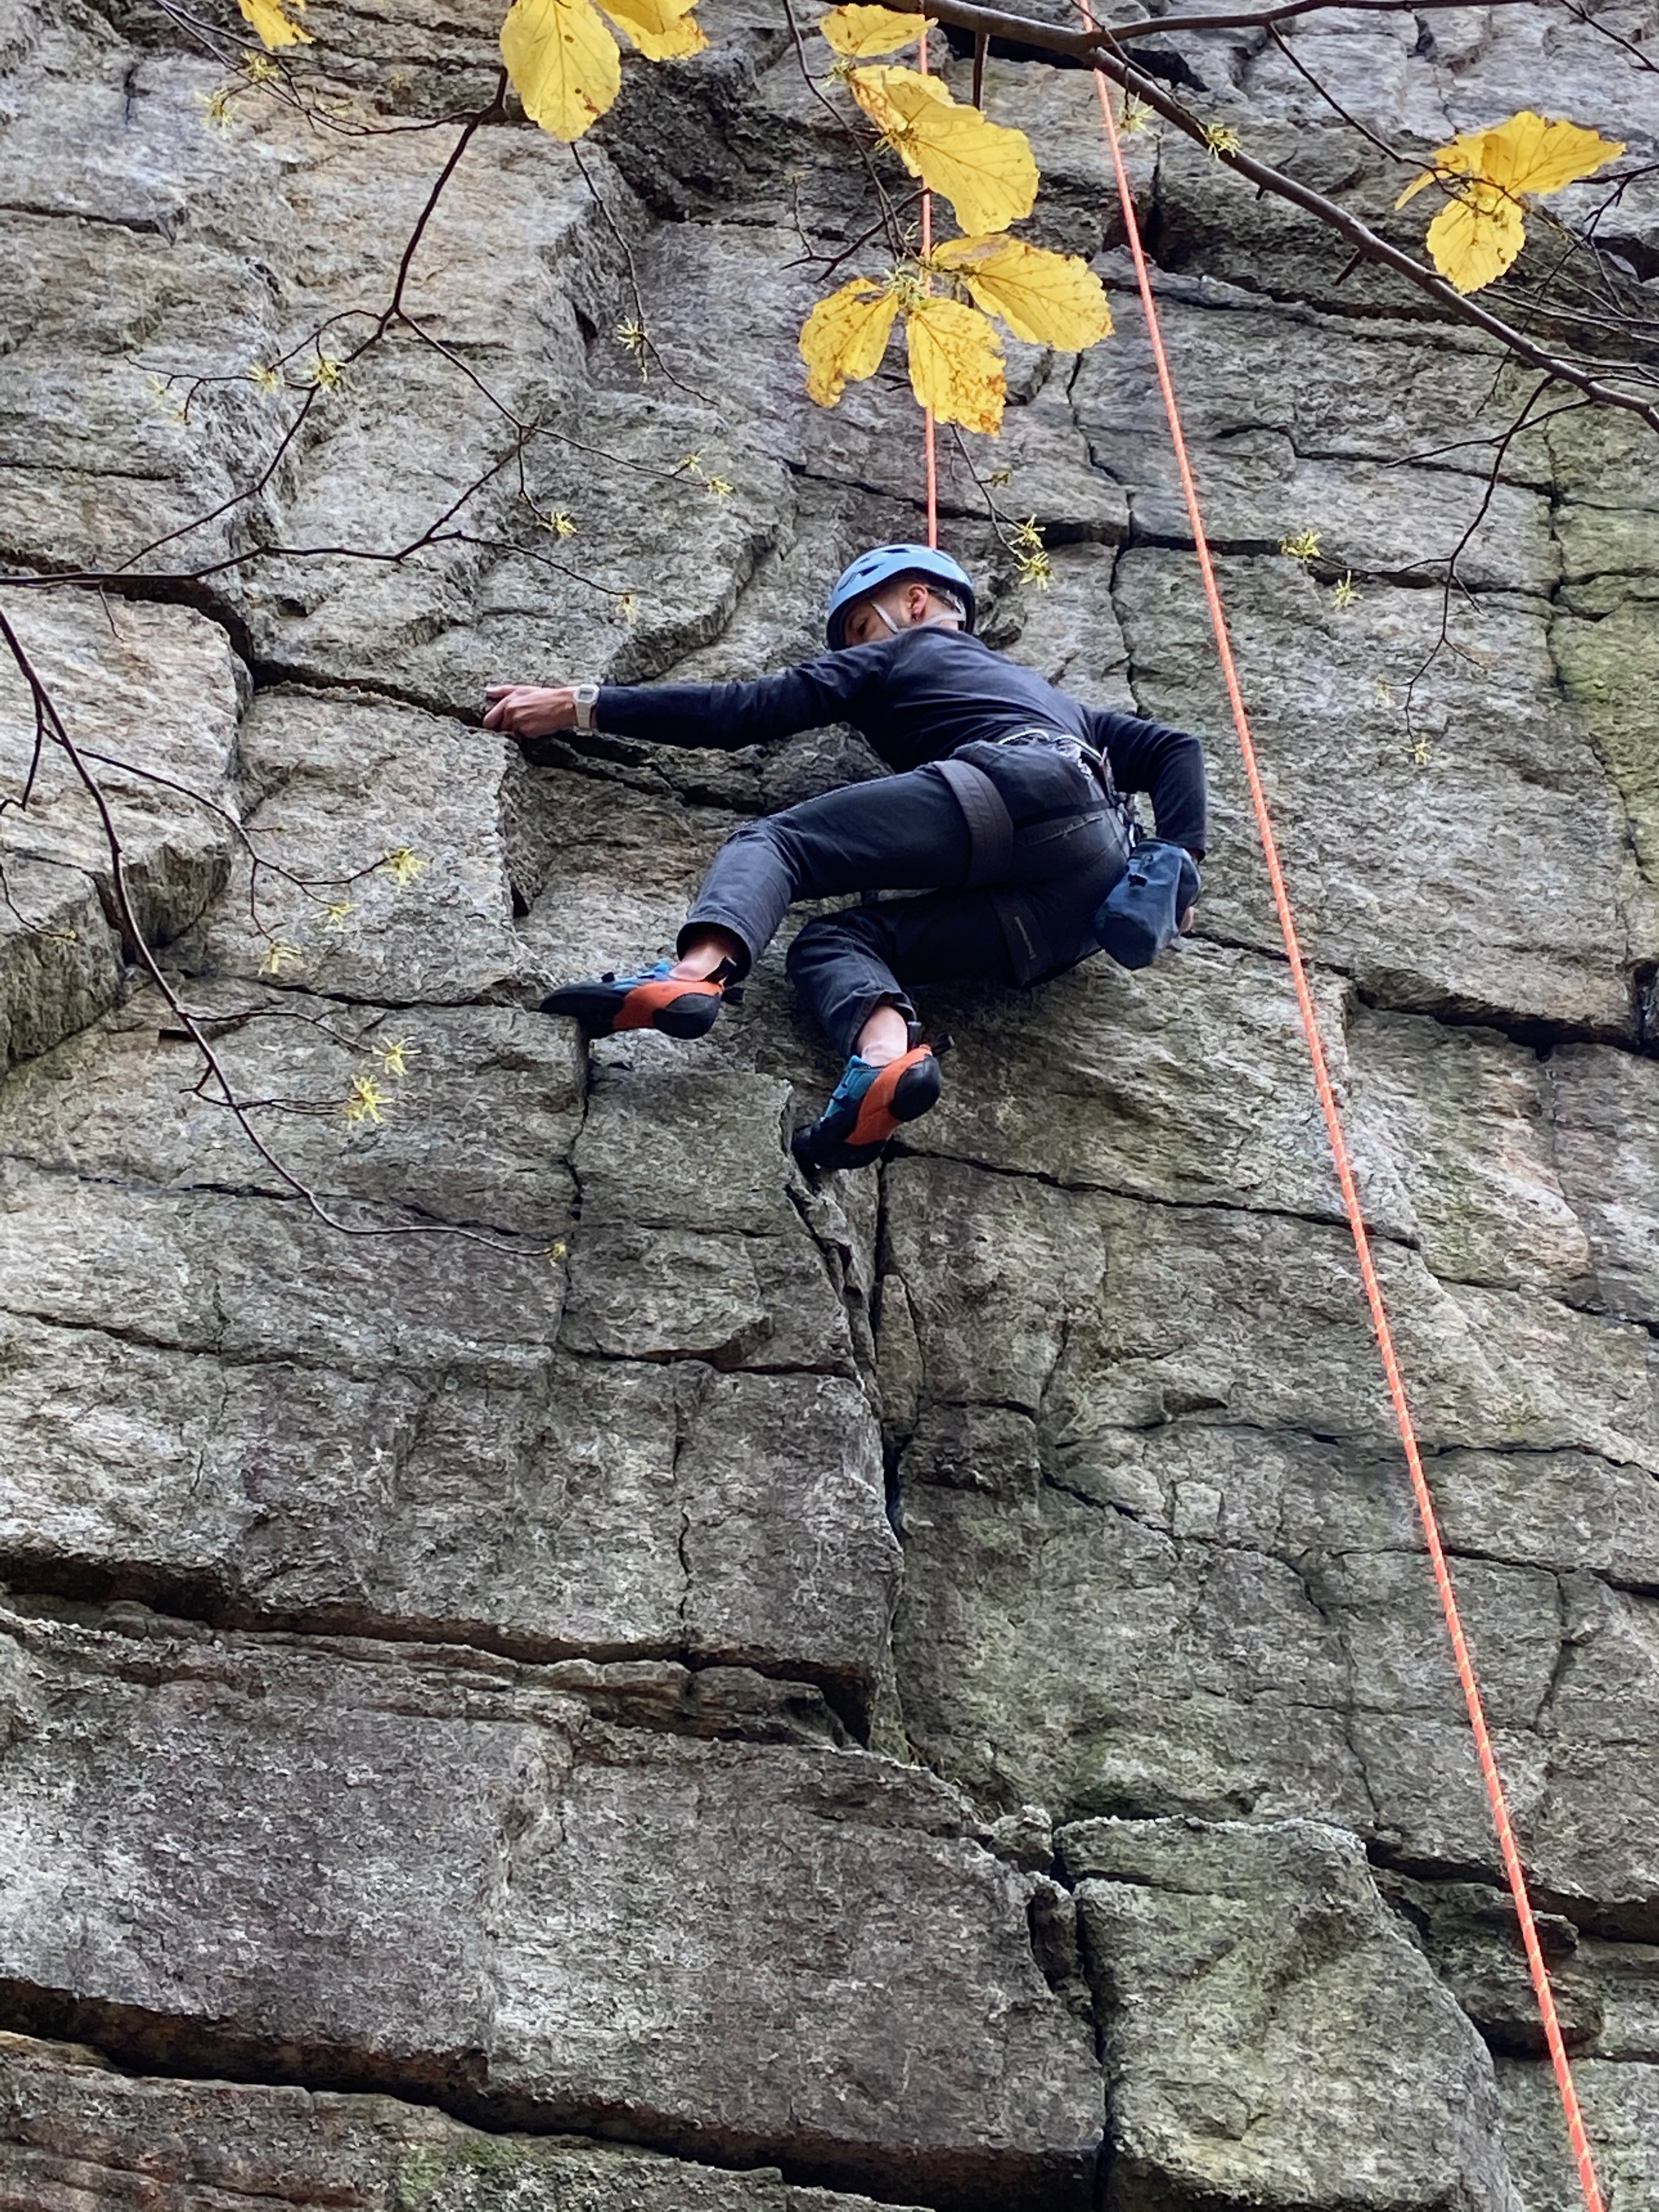 Me, climbing a flat rock wall with a rope going from my harness to the top of the cliff, then back down to the ground.